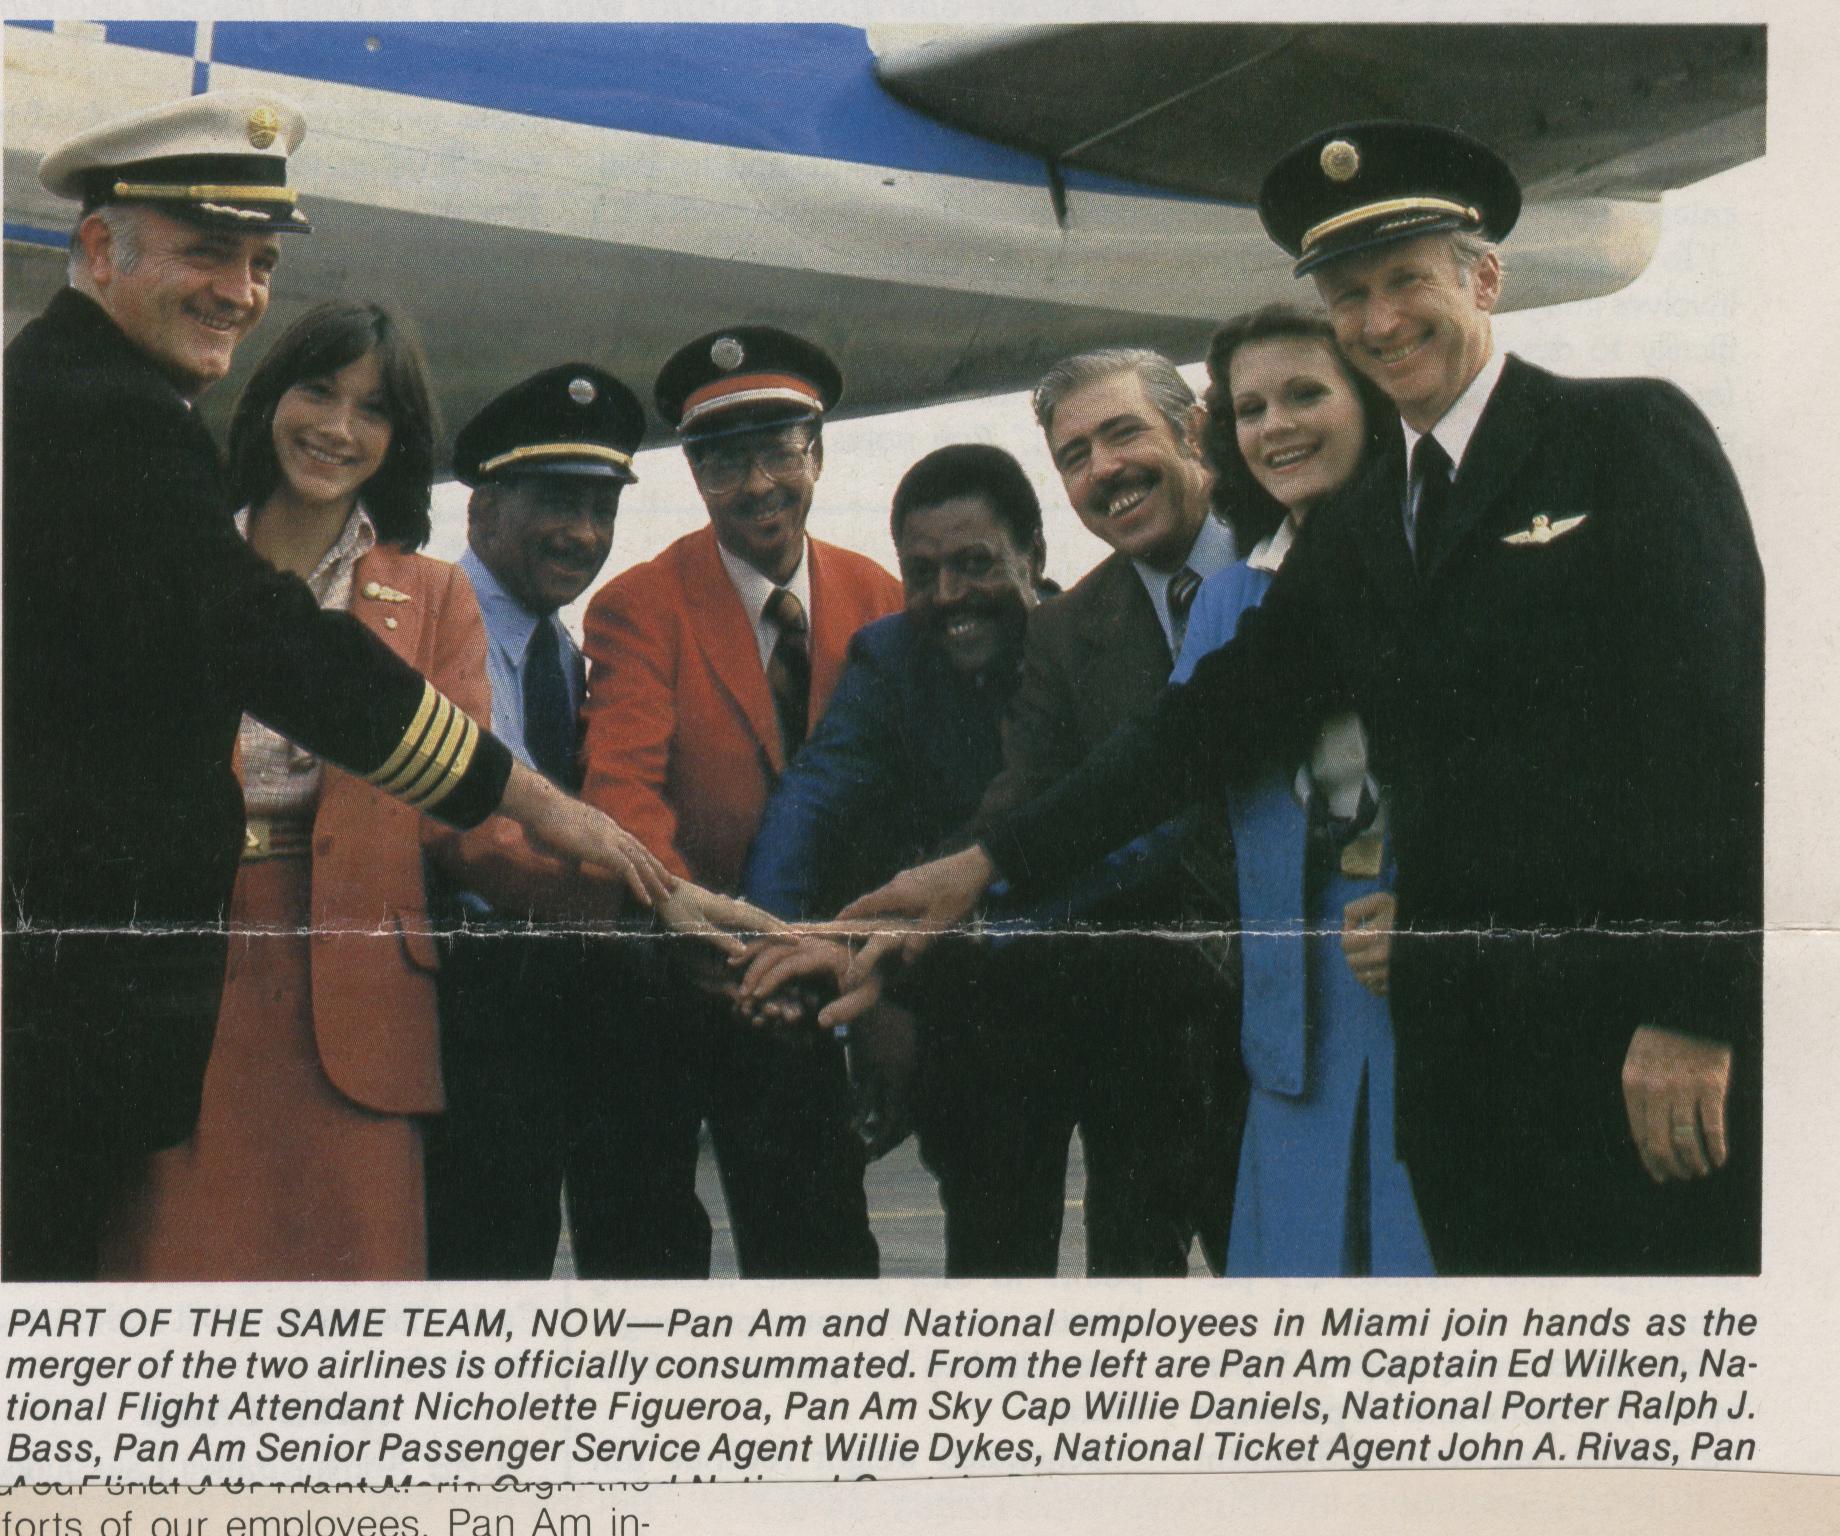 1980 Pan Am & National Airlines employees from various departments post by a 707 in the lead up to the Pan Am - National Merger. The merger was signed in January of 1980.